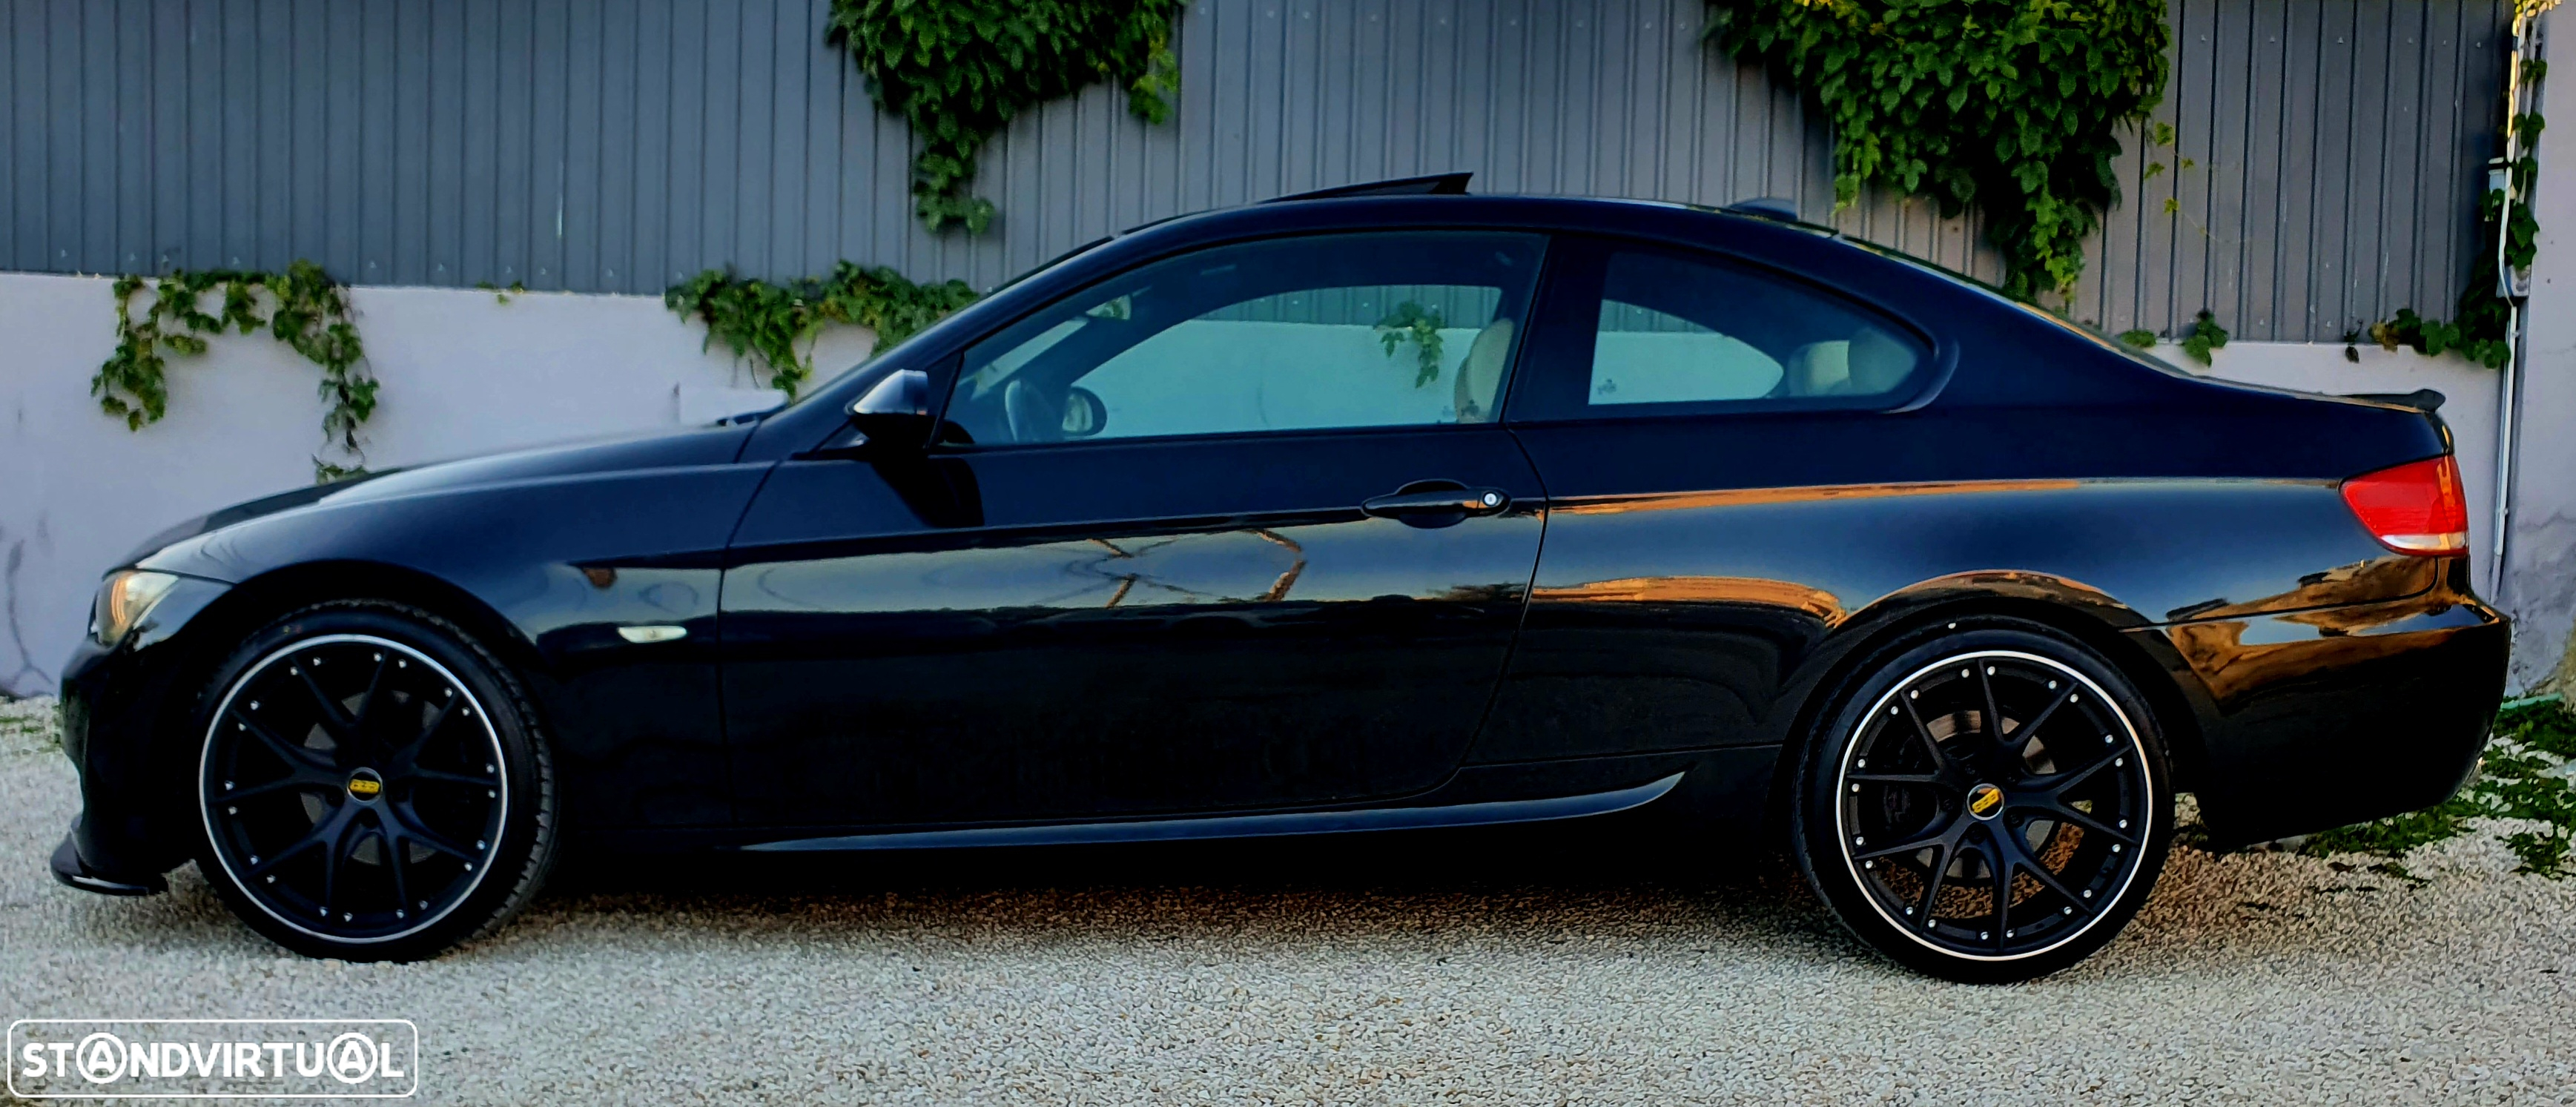 BMW 320 d Coupe - 2